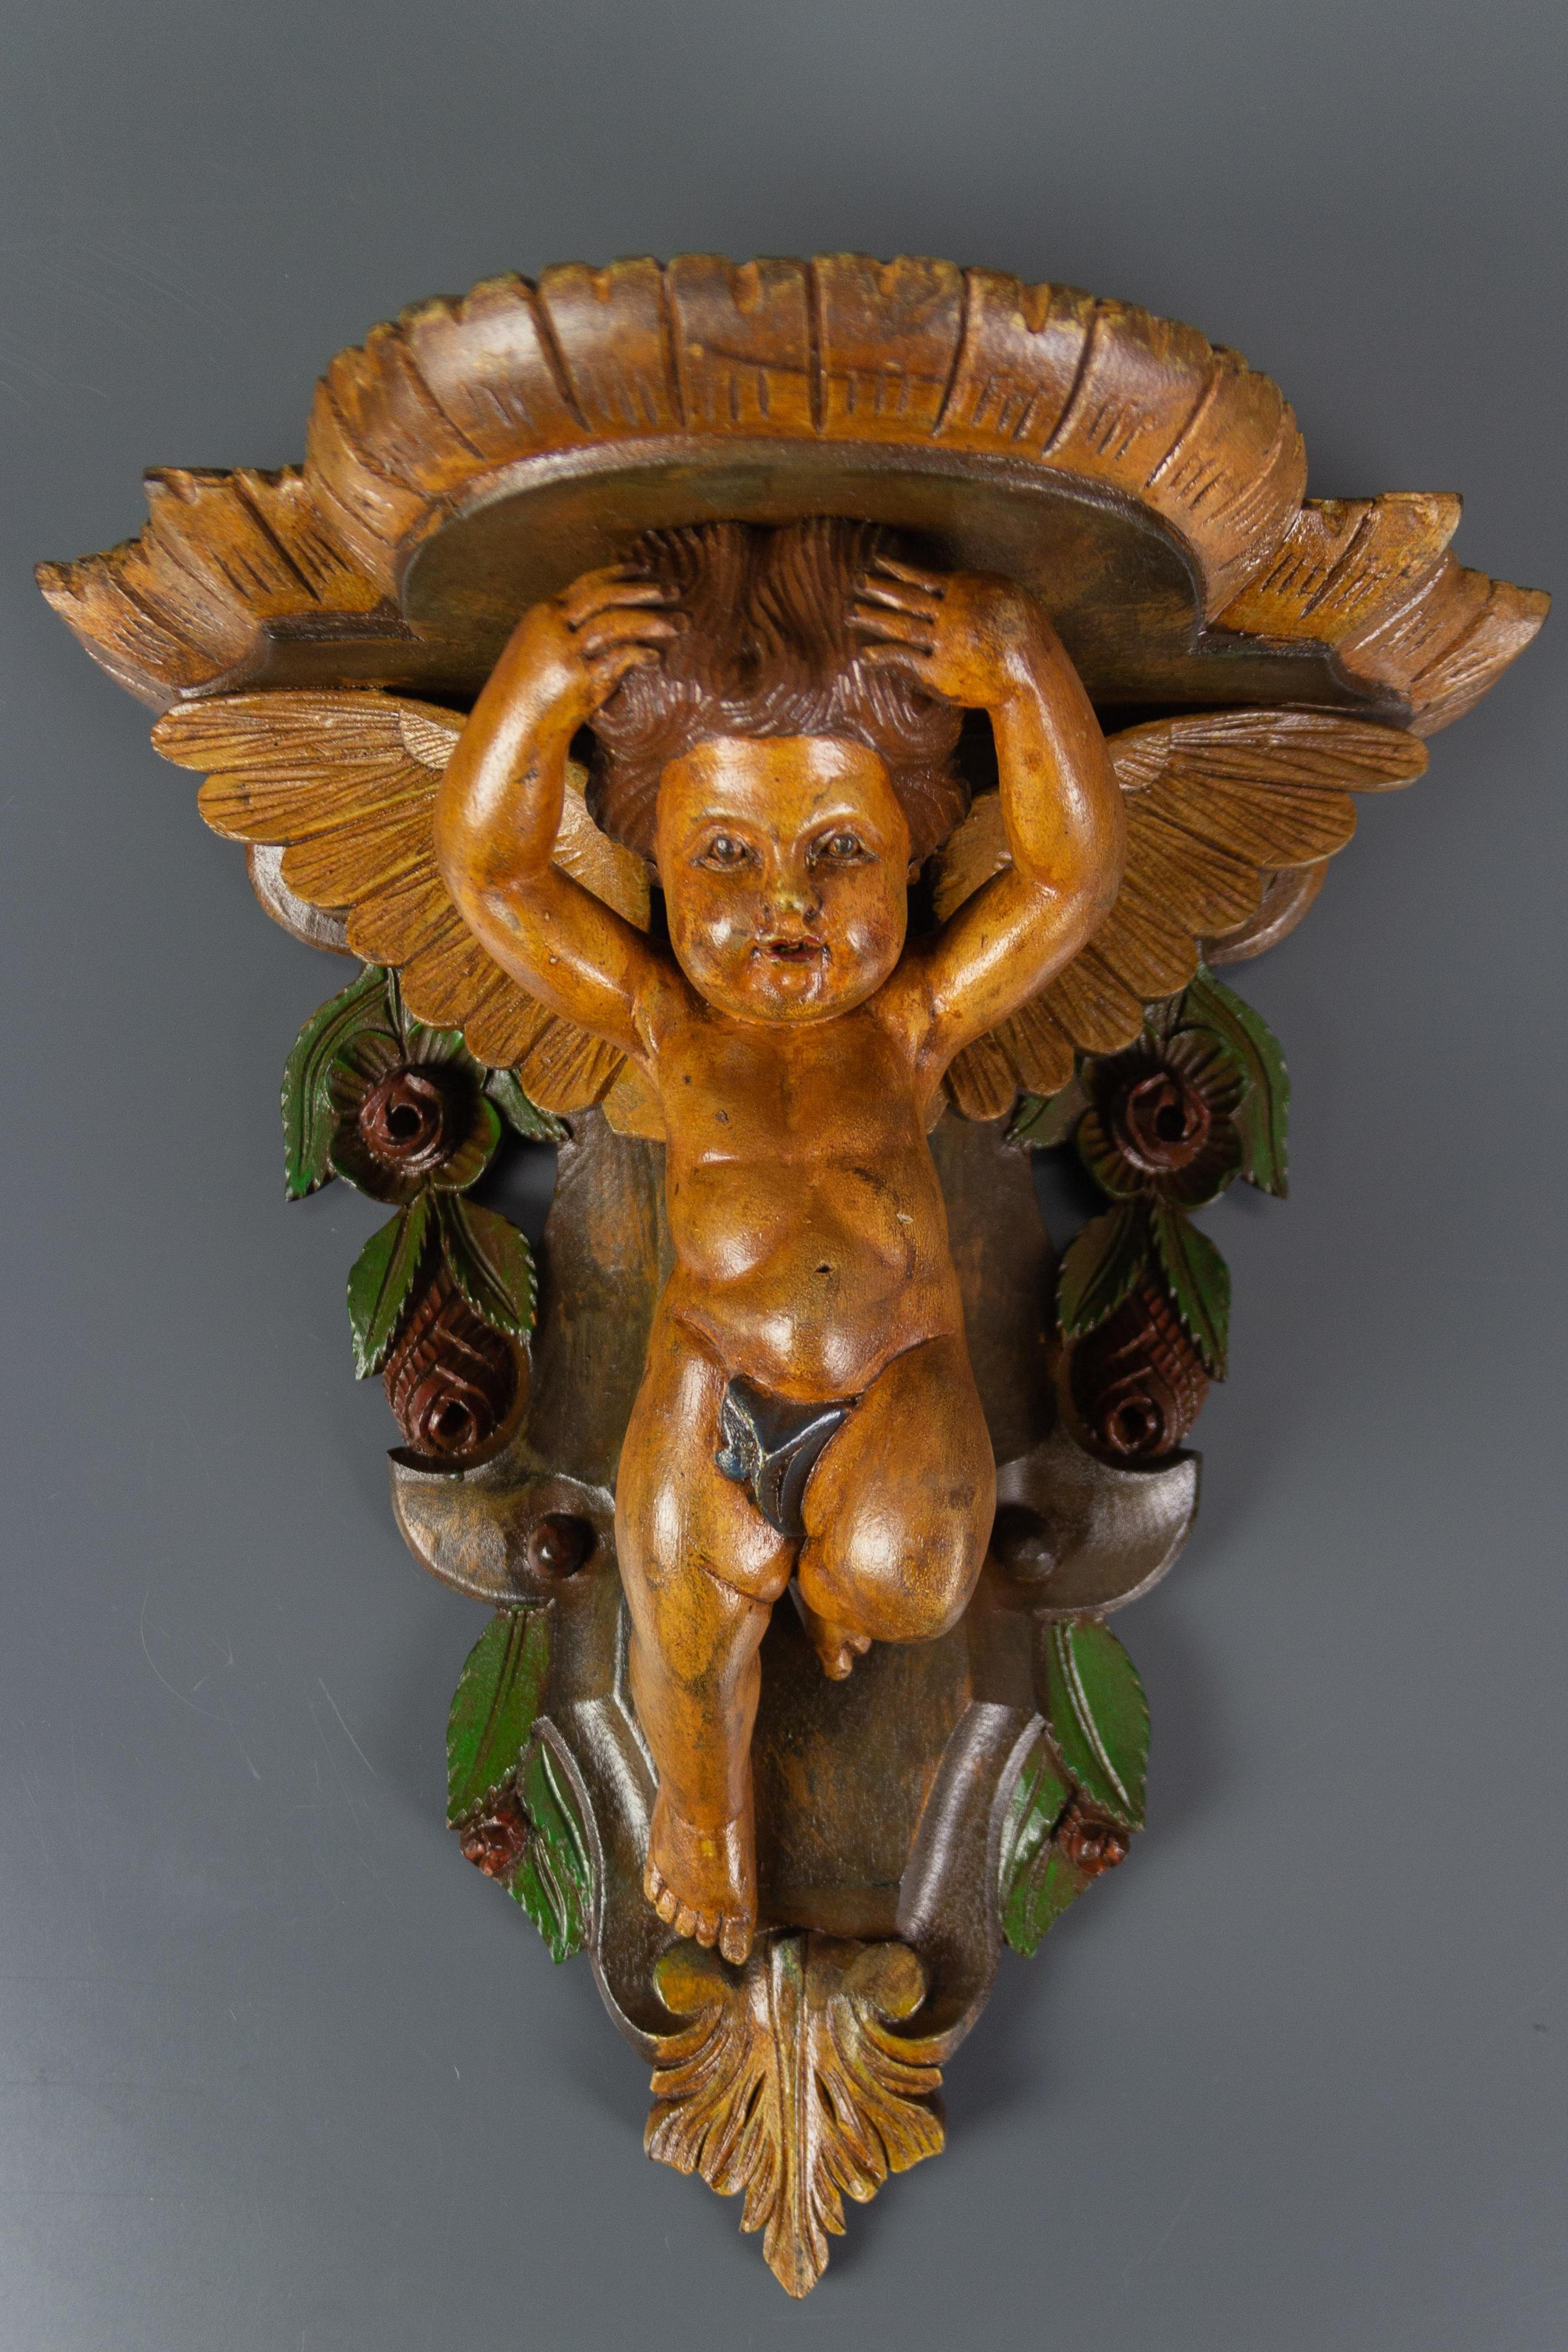 An adorable and colorful wooden wall bracket or shelf with an angel figure. Beautifully decorated with flowers and leaves. Italy, the 1950s.
Dimensions: height 40 cm / 15.74 in; width 37 cm / 14.56 in; depth 18 cm / 7.08 in.